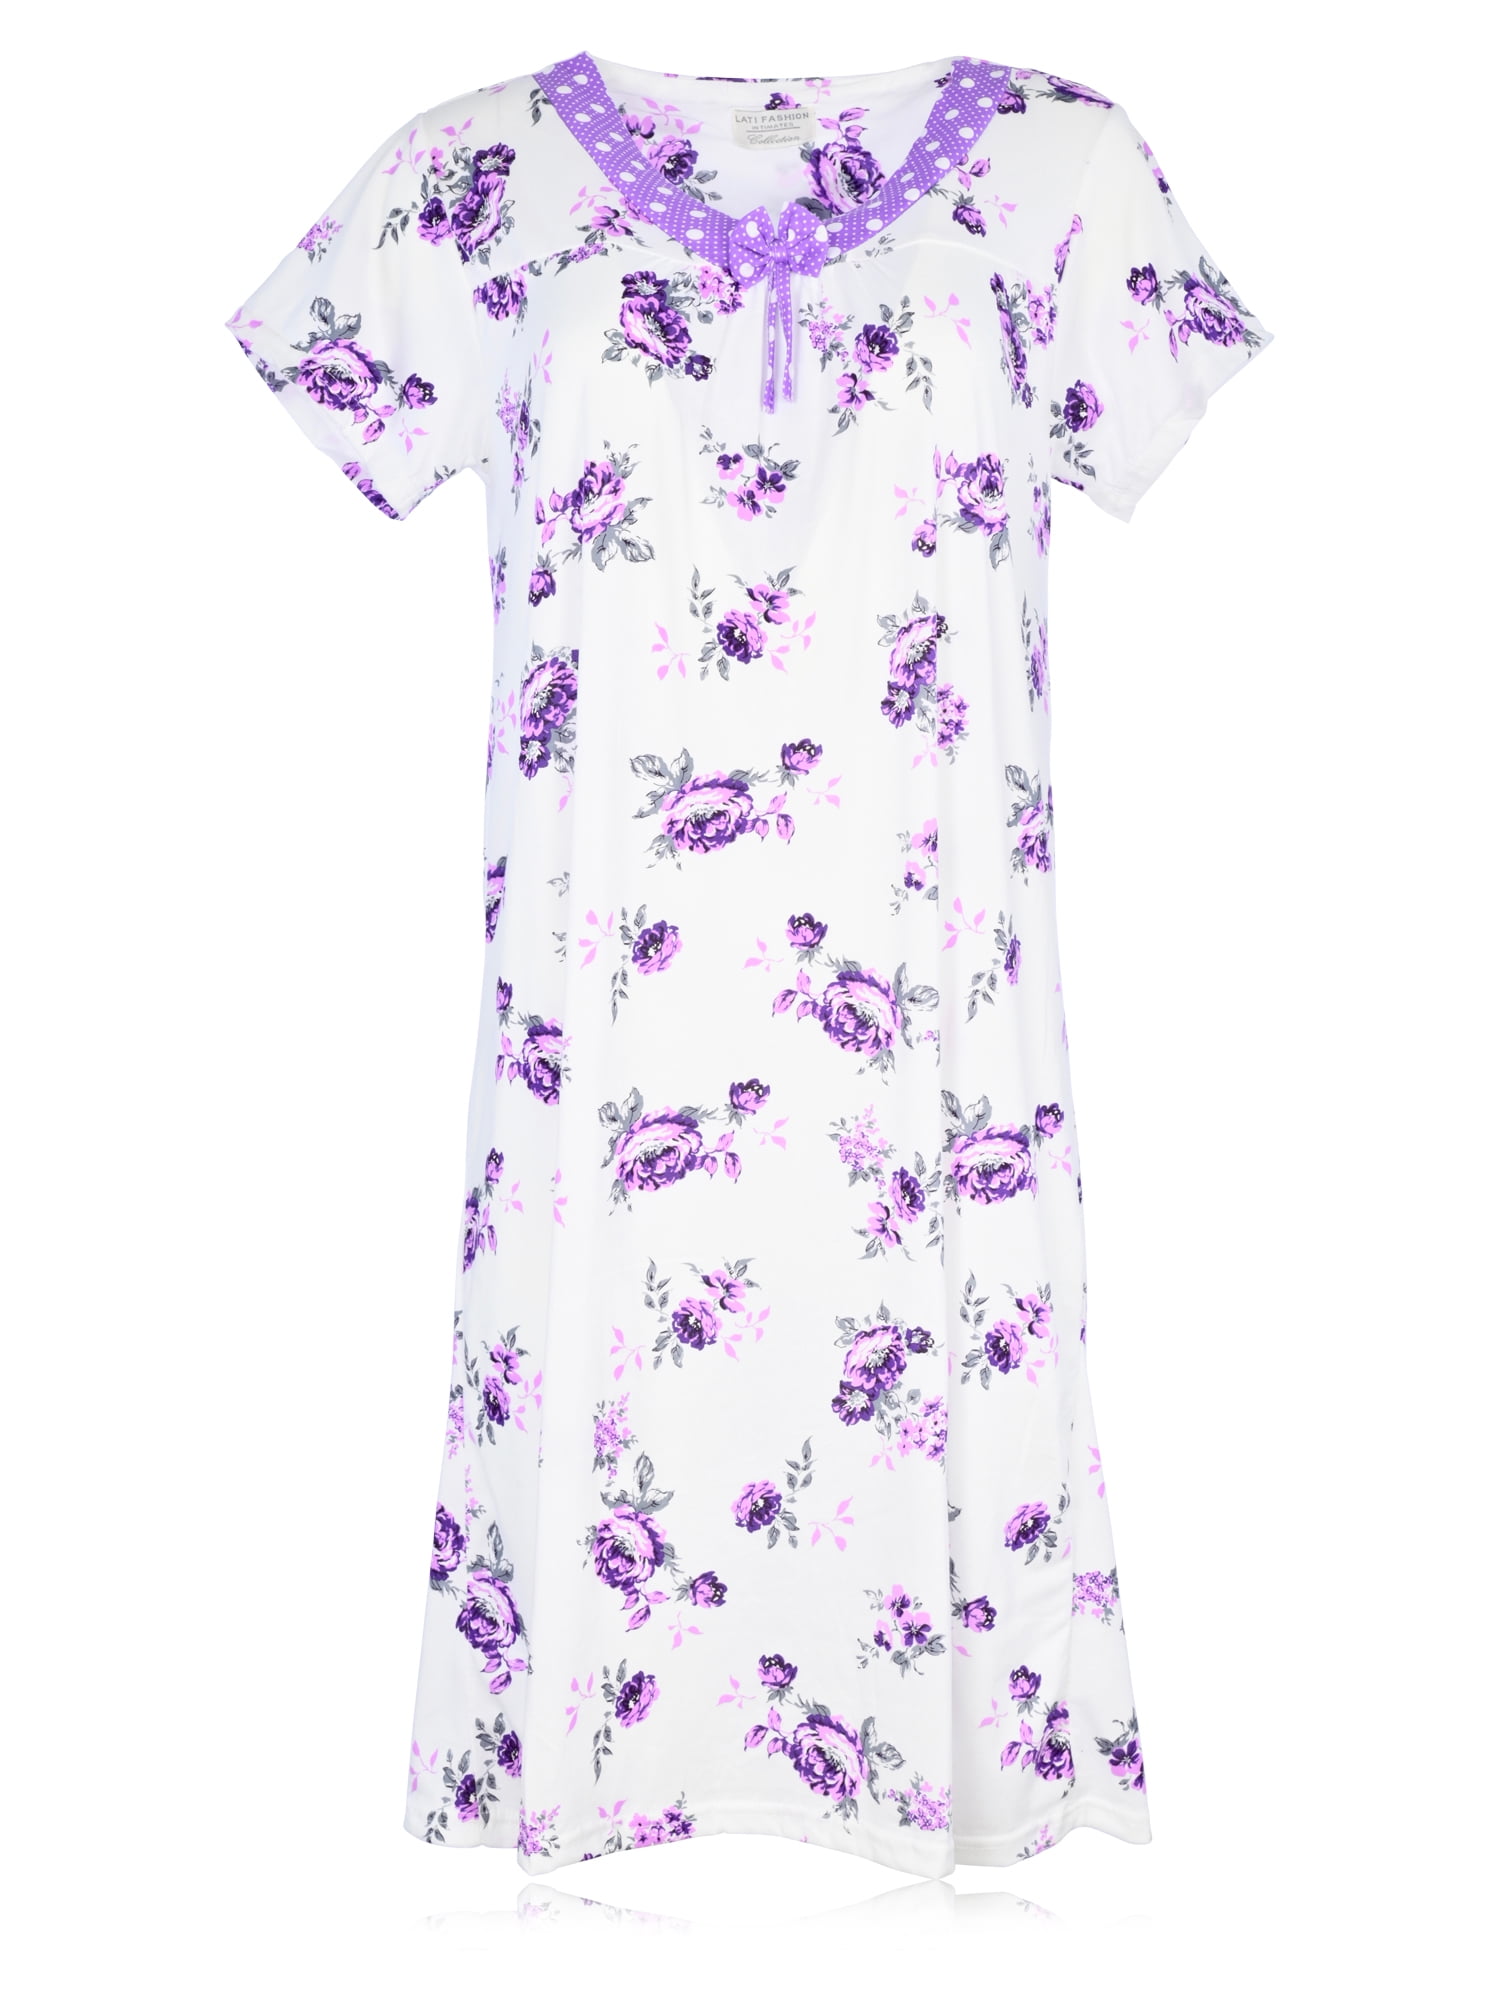 PajamaGram Womens Nightgowns Ultra Soft - Cotton Pin Dot, Lavender